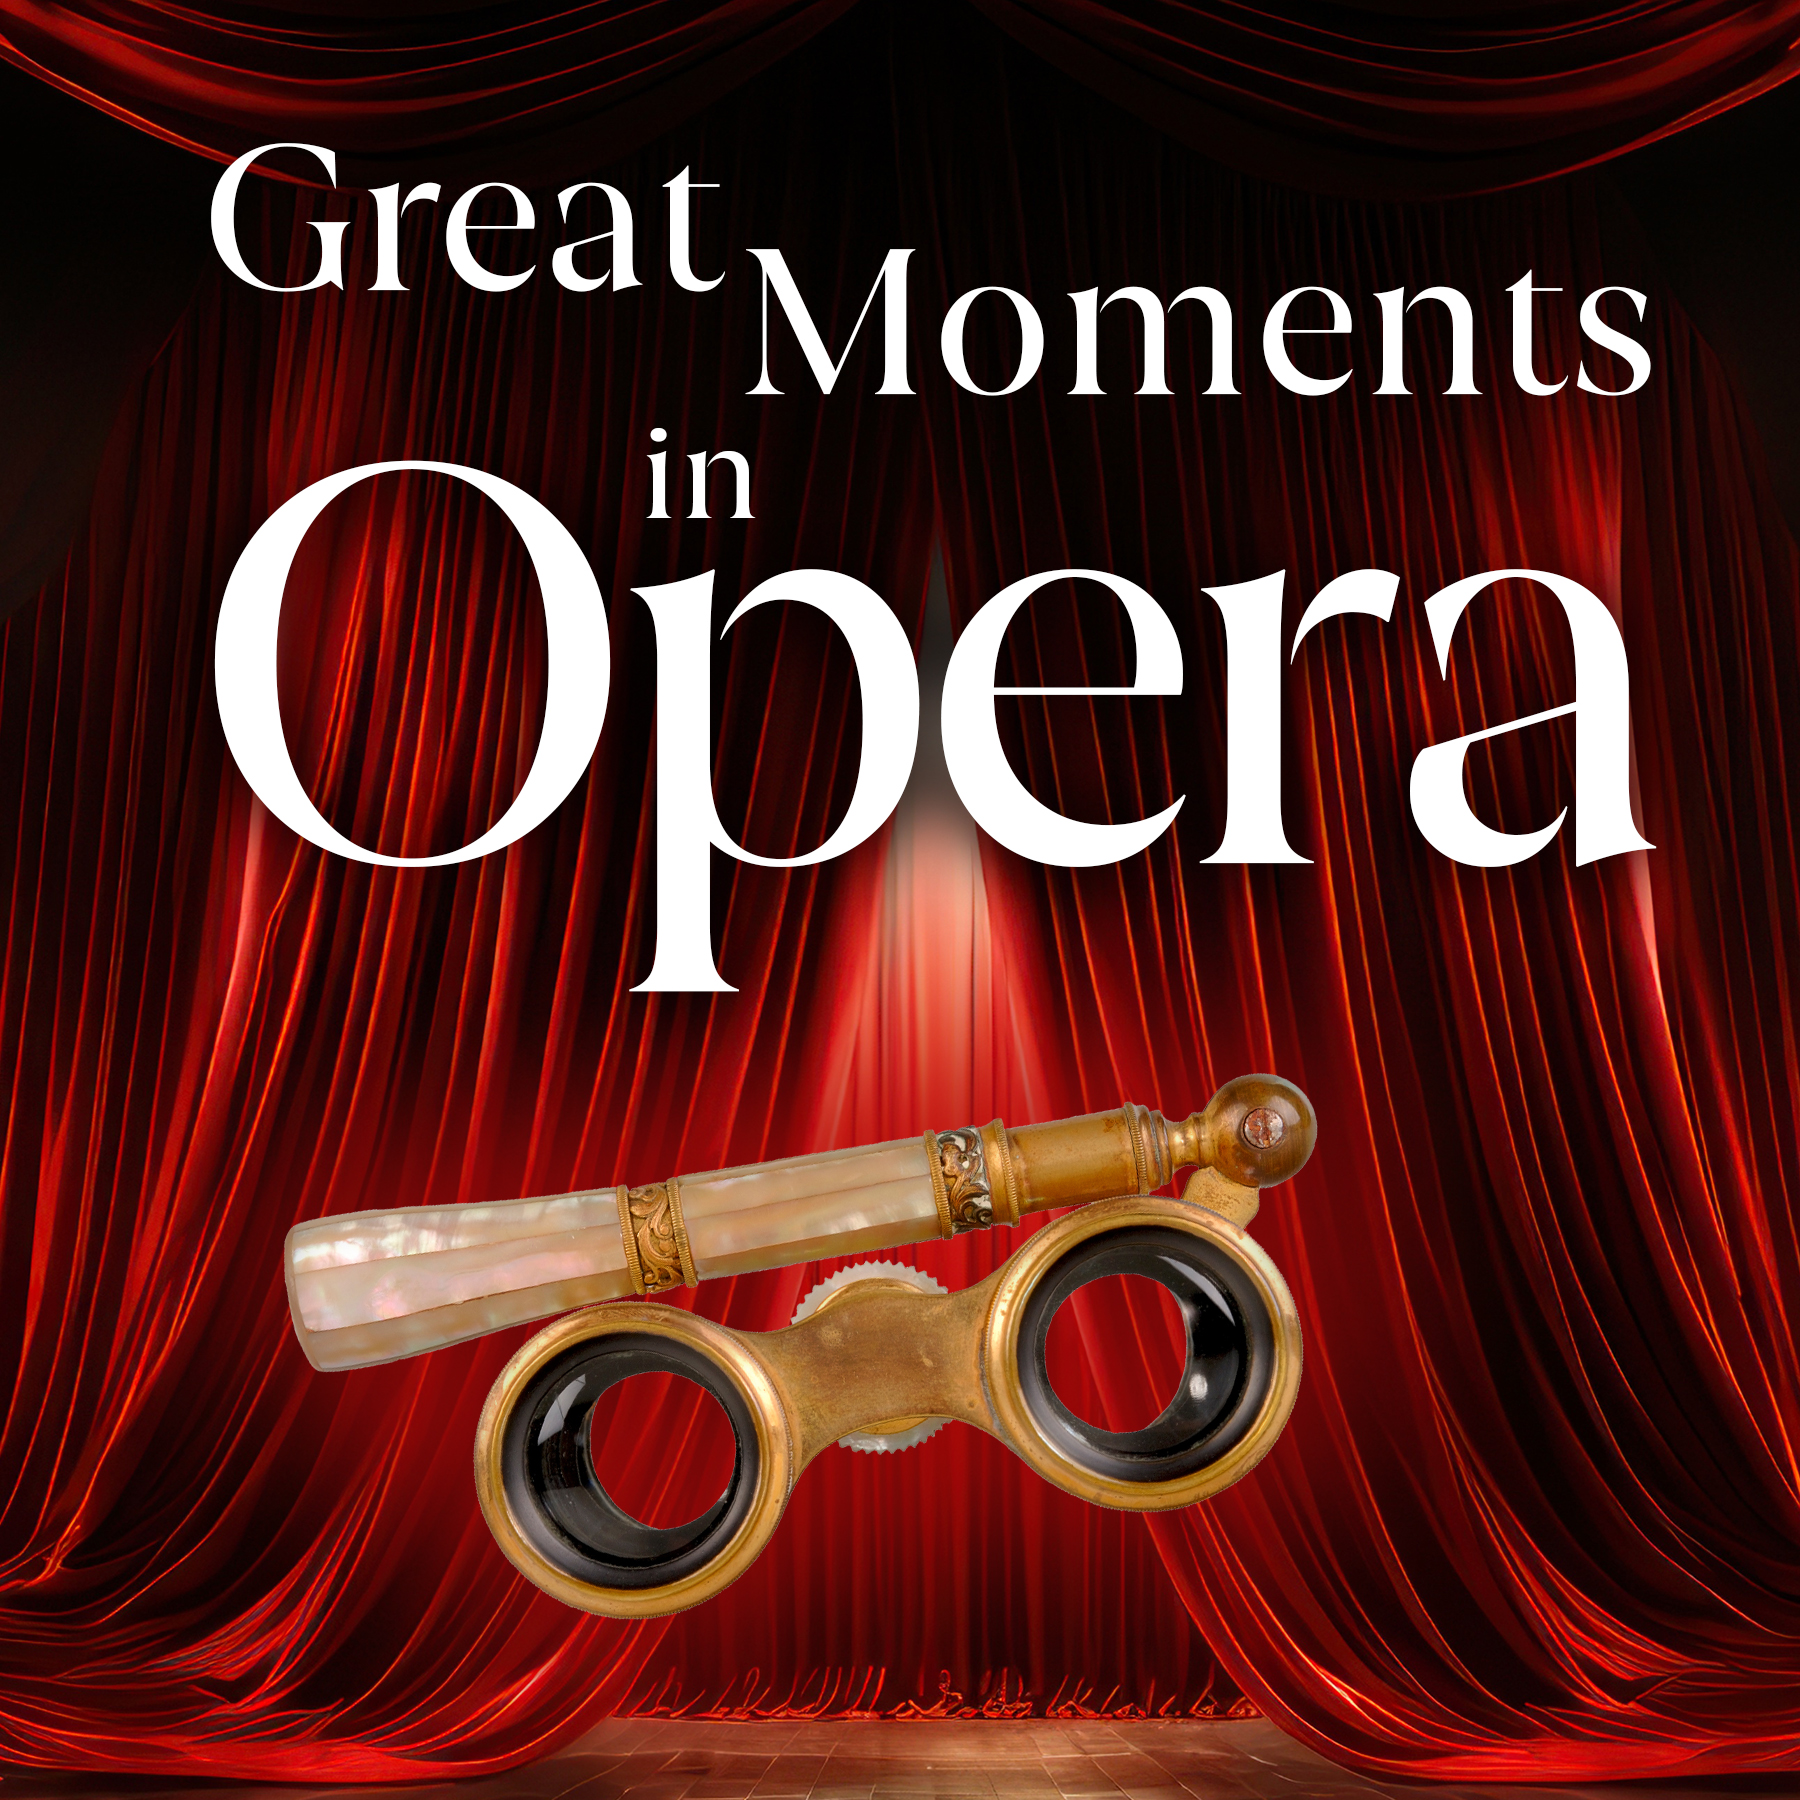 Great Moments in Opera